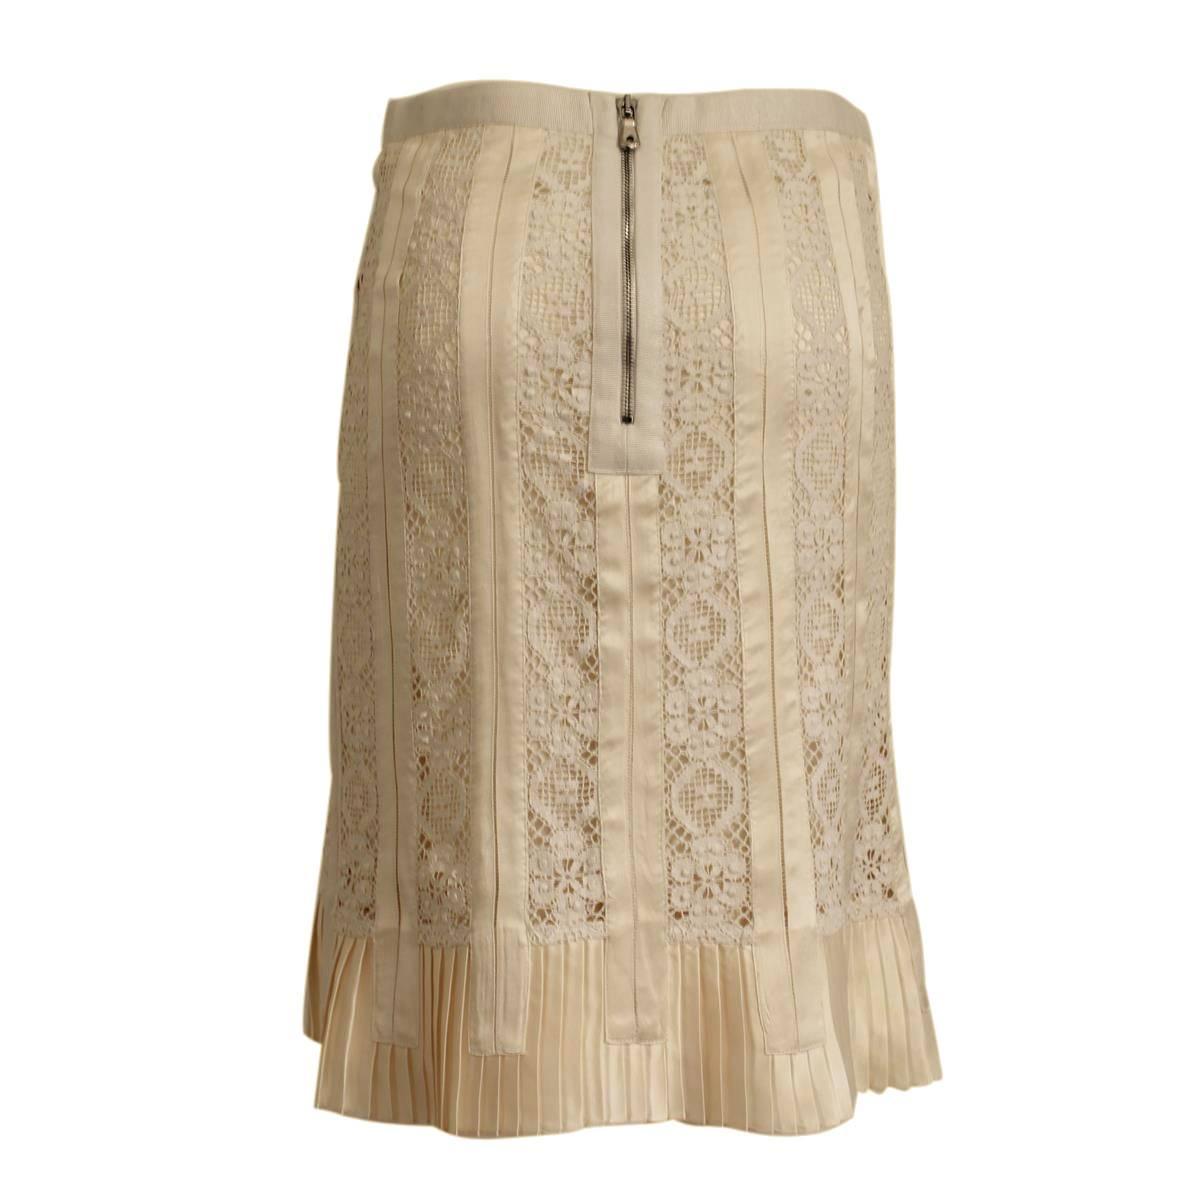 Beautiful and classy Dolce & Gabbana skirt
White cream color
Cotton and silk (60%)
All worked in abeautiful lace and embroidery
Plissé silk at the bottom
Total lenght cm 58
Italian size 42 (US 6/8)
Made in Italy
Worldwide express shipping